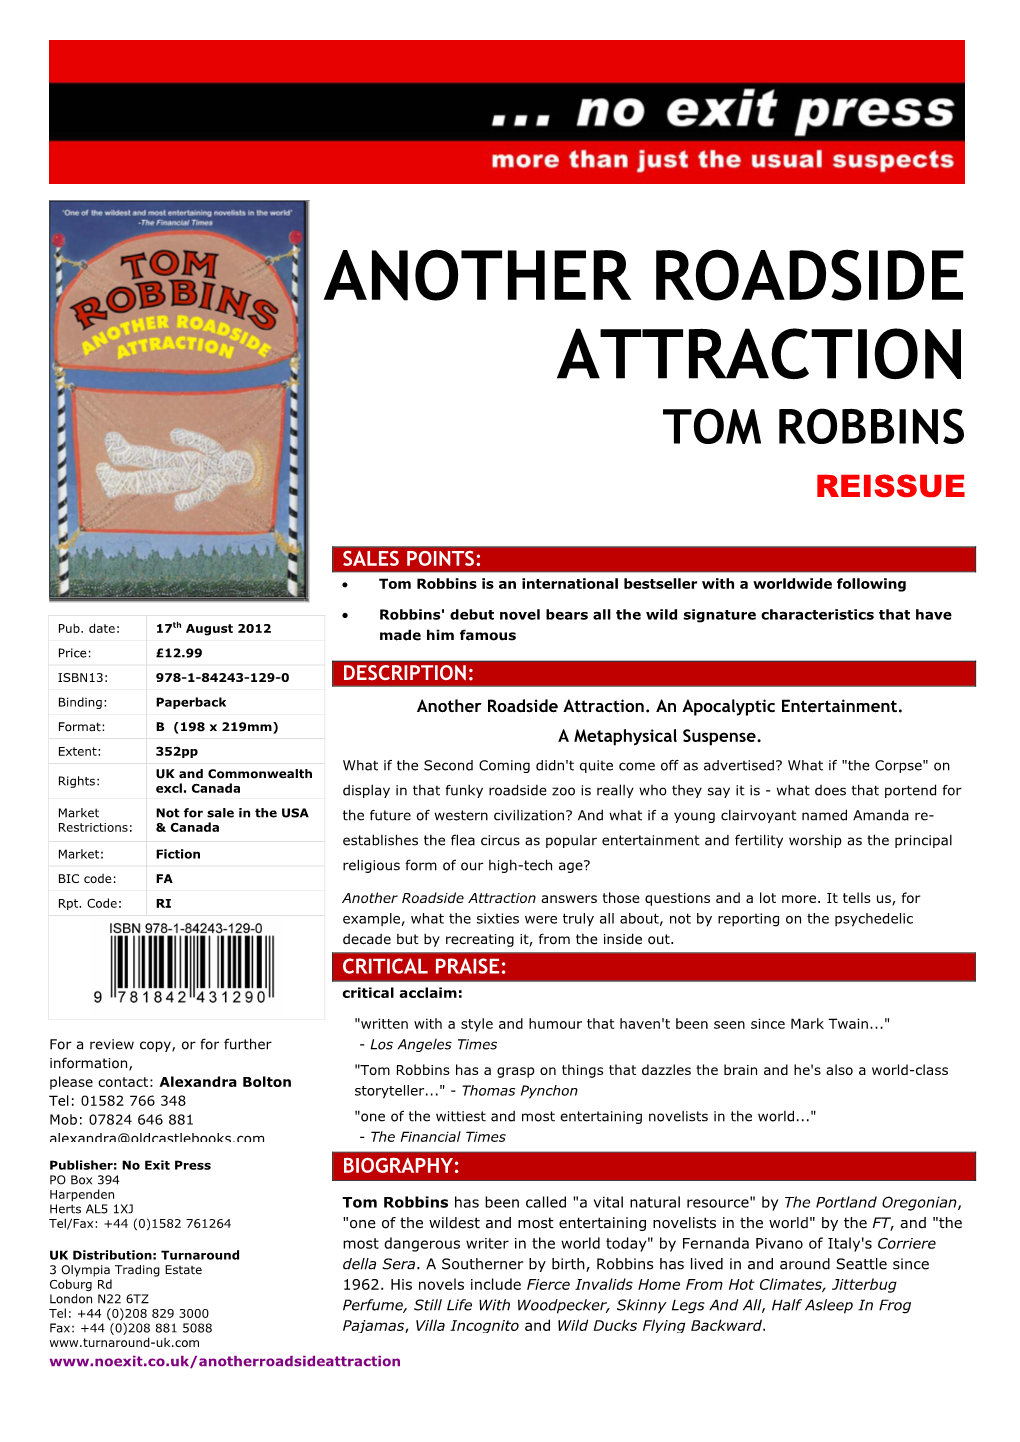 Another Roadside Attraction Tom Robbins Reissue